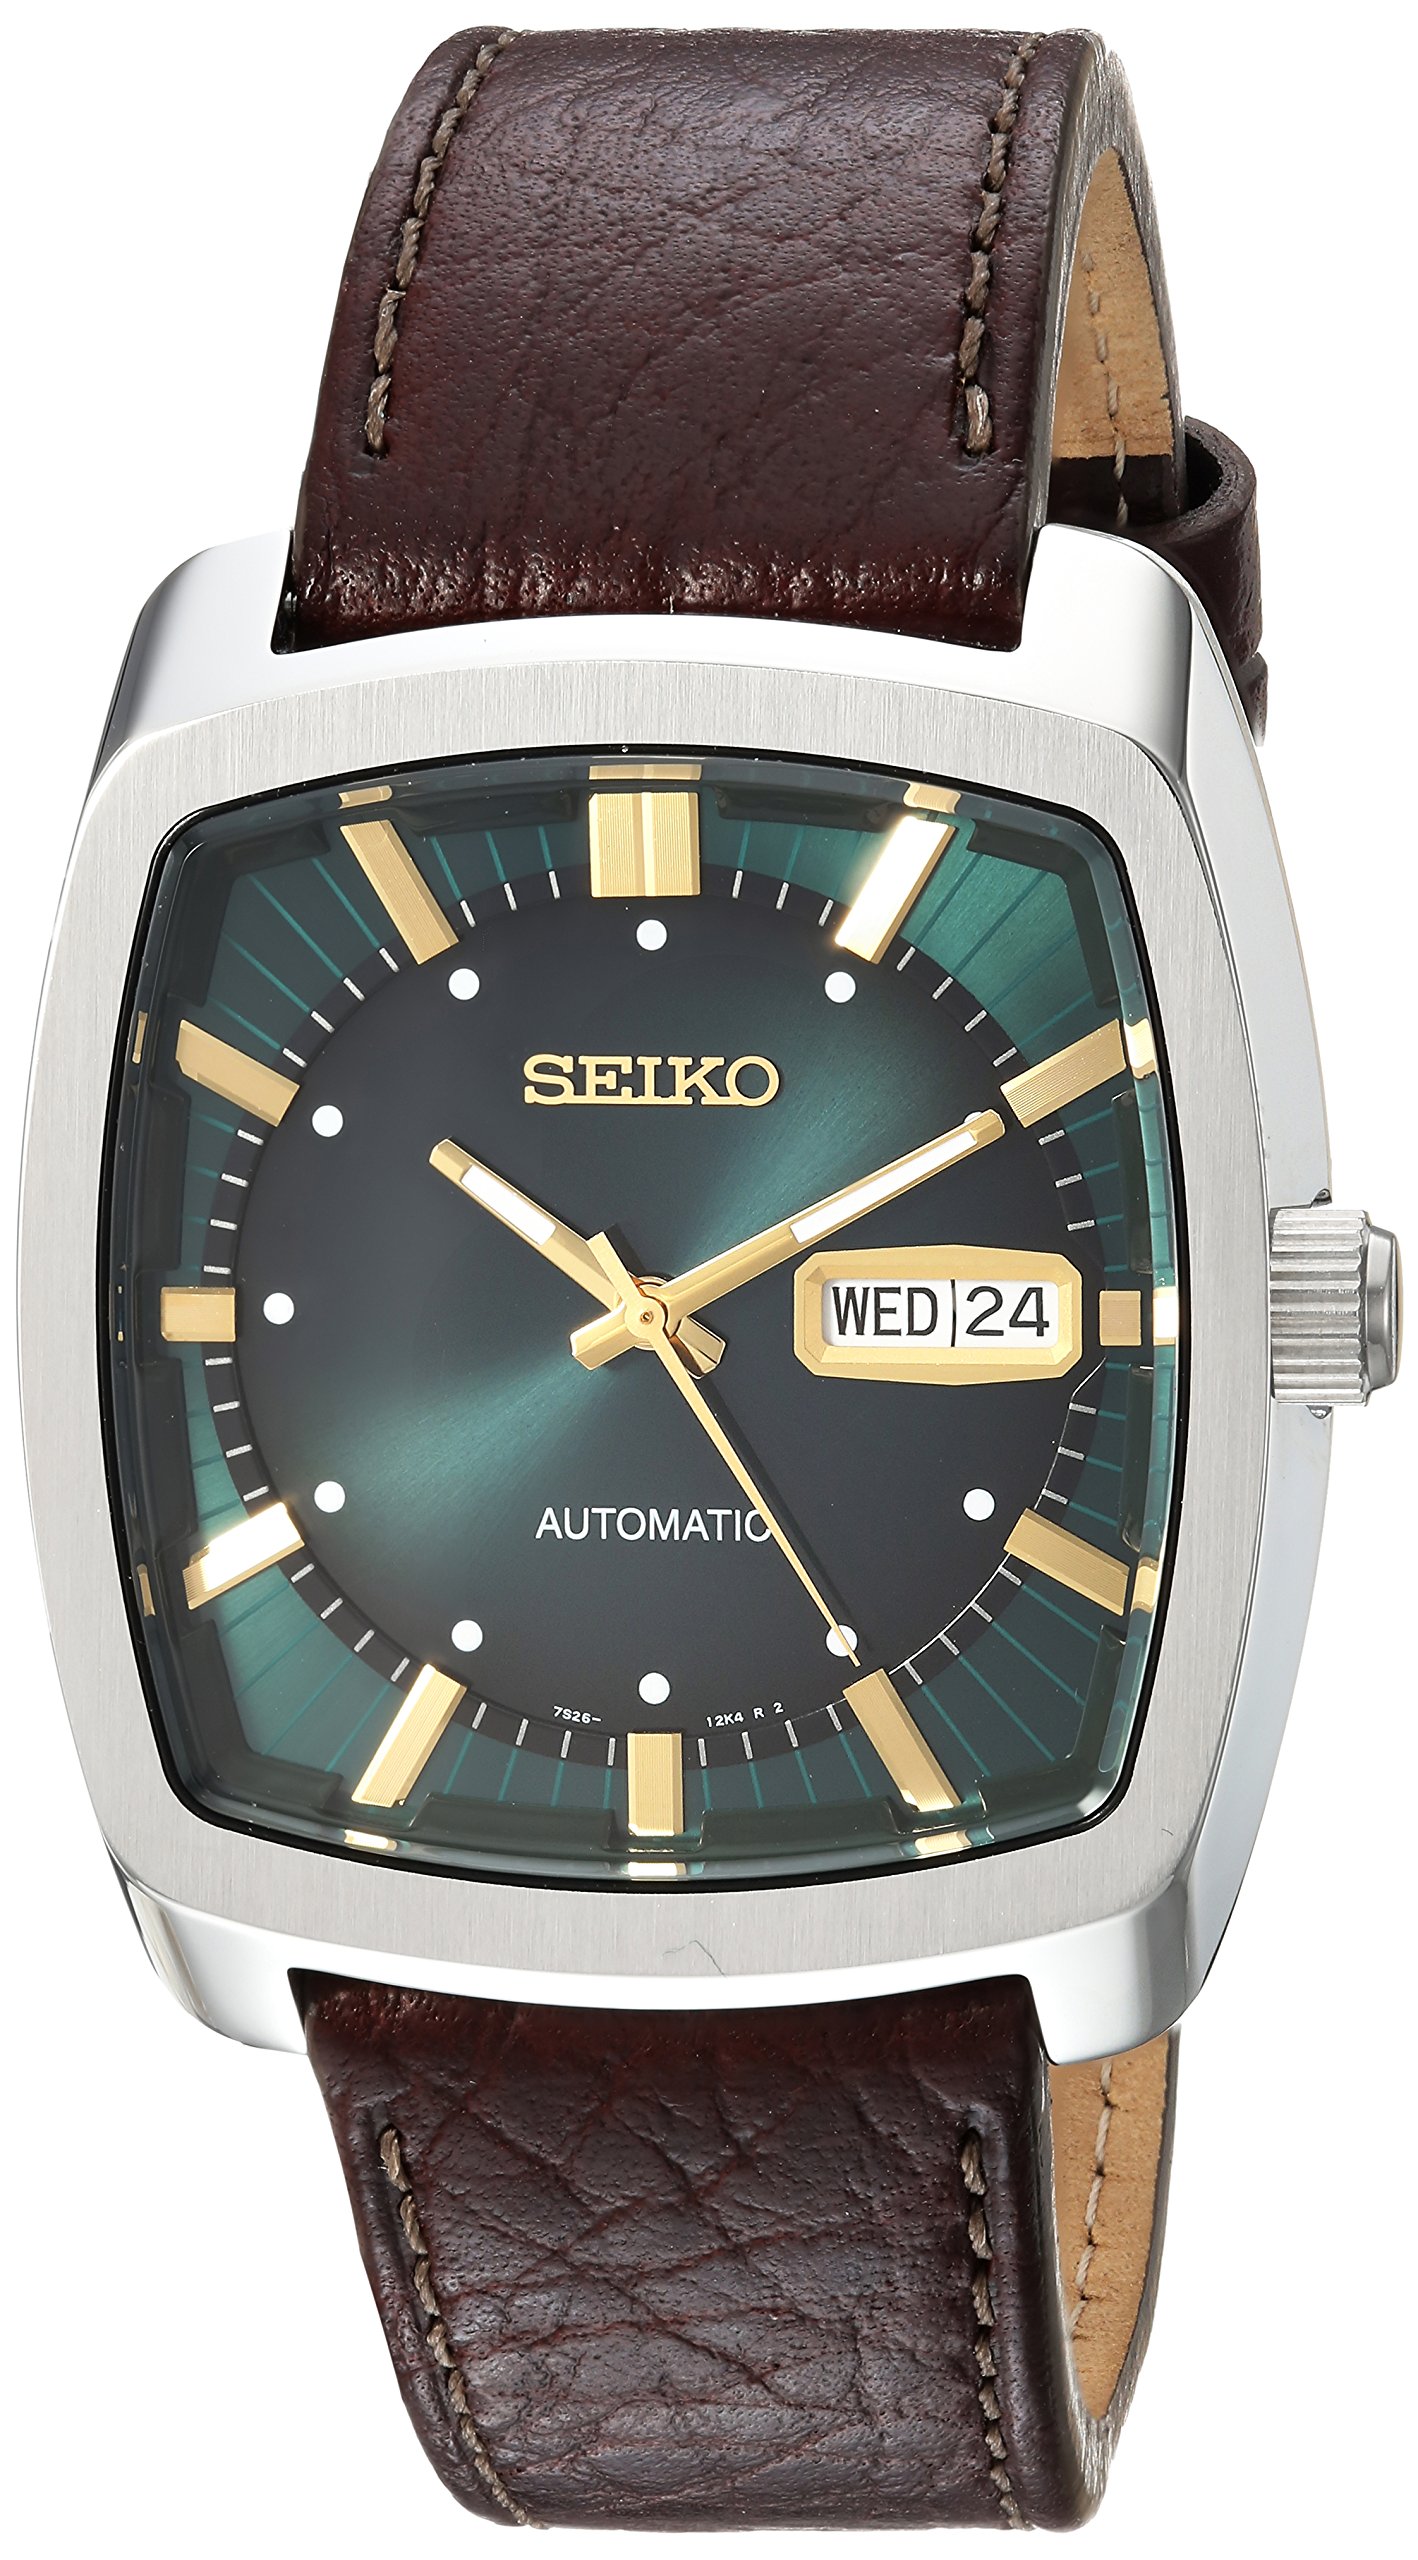 Top 70+ imagen seiko men’s recraft series automatic leather casual watch